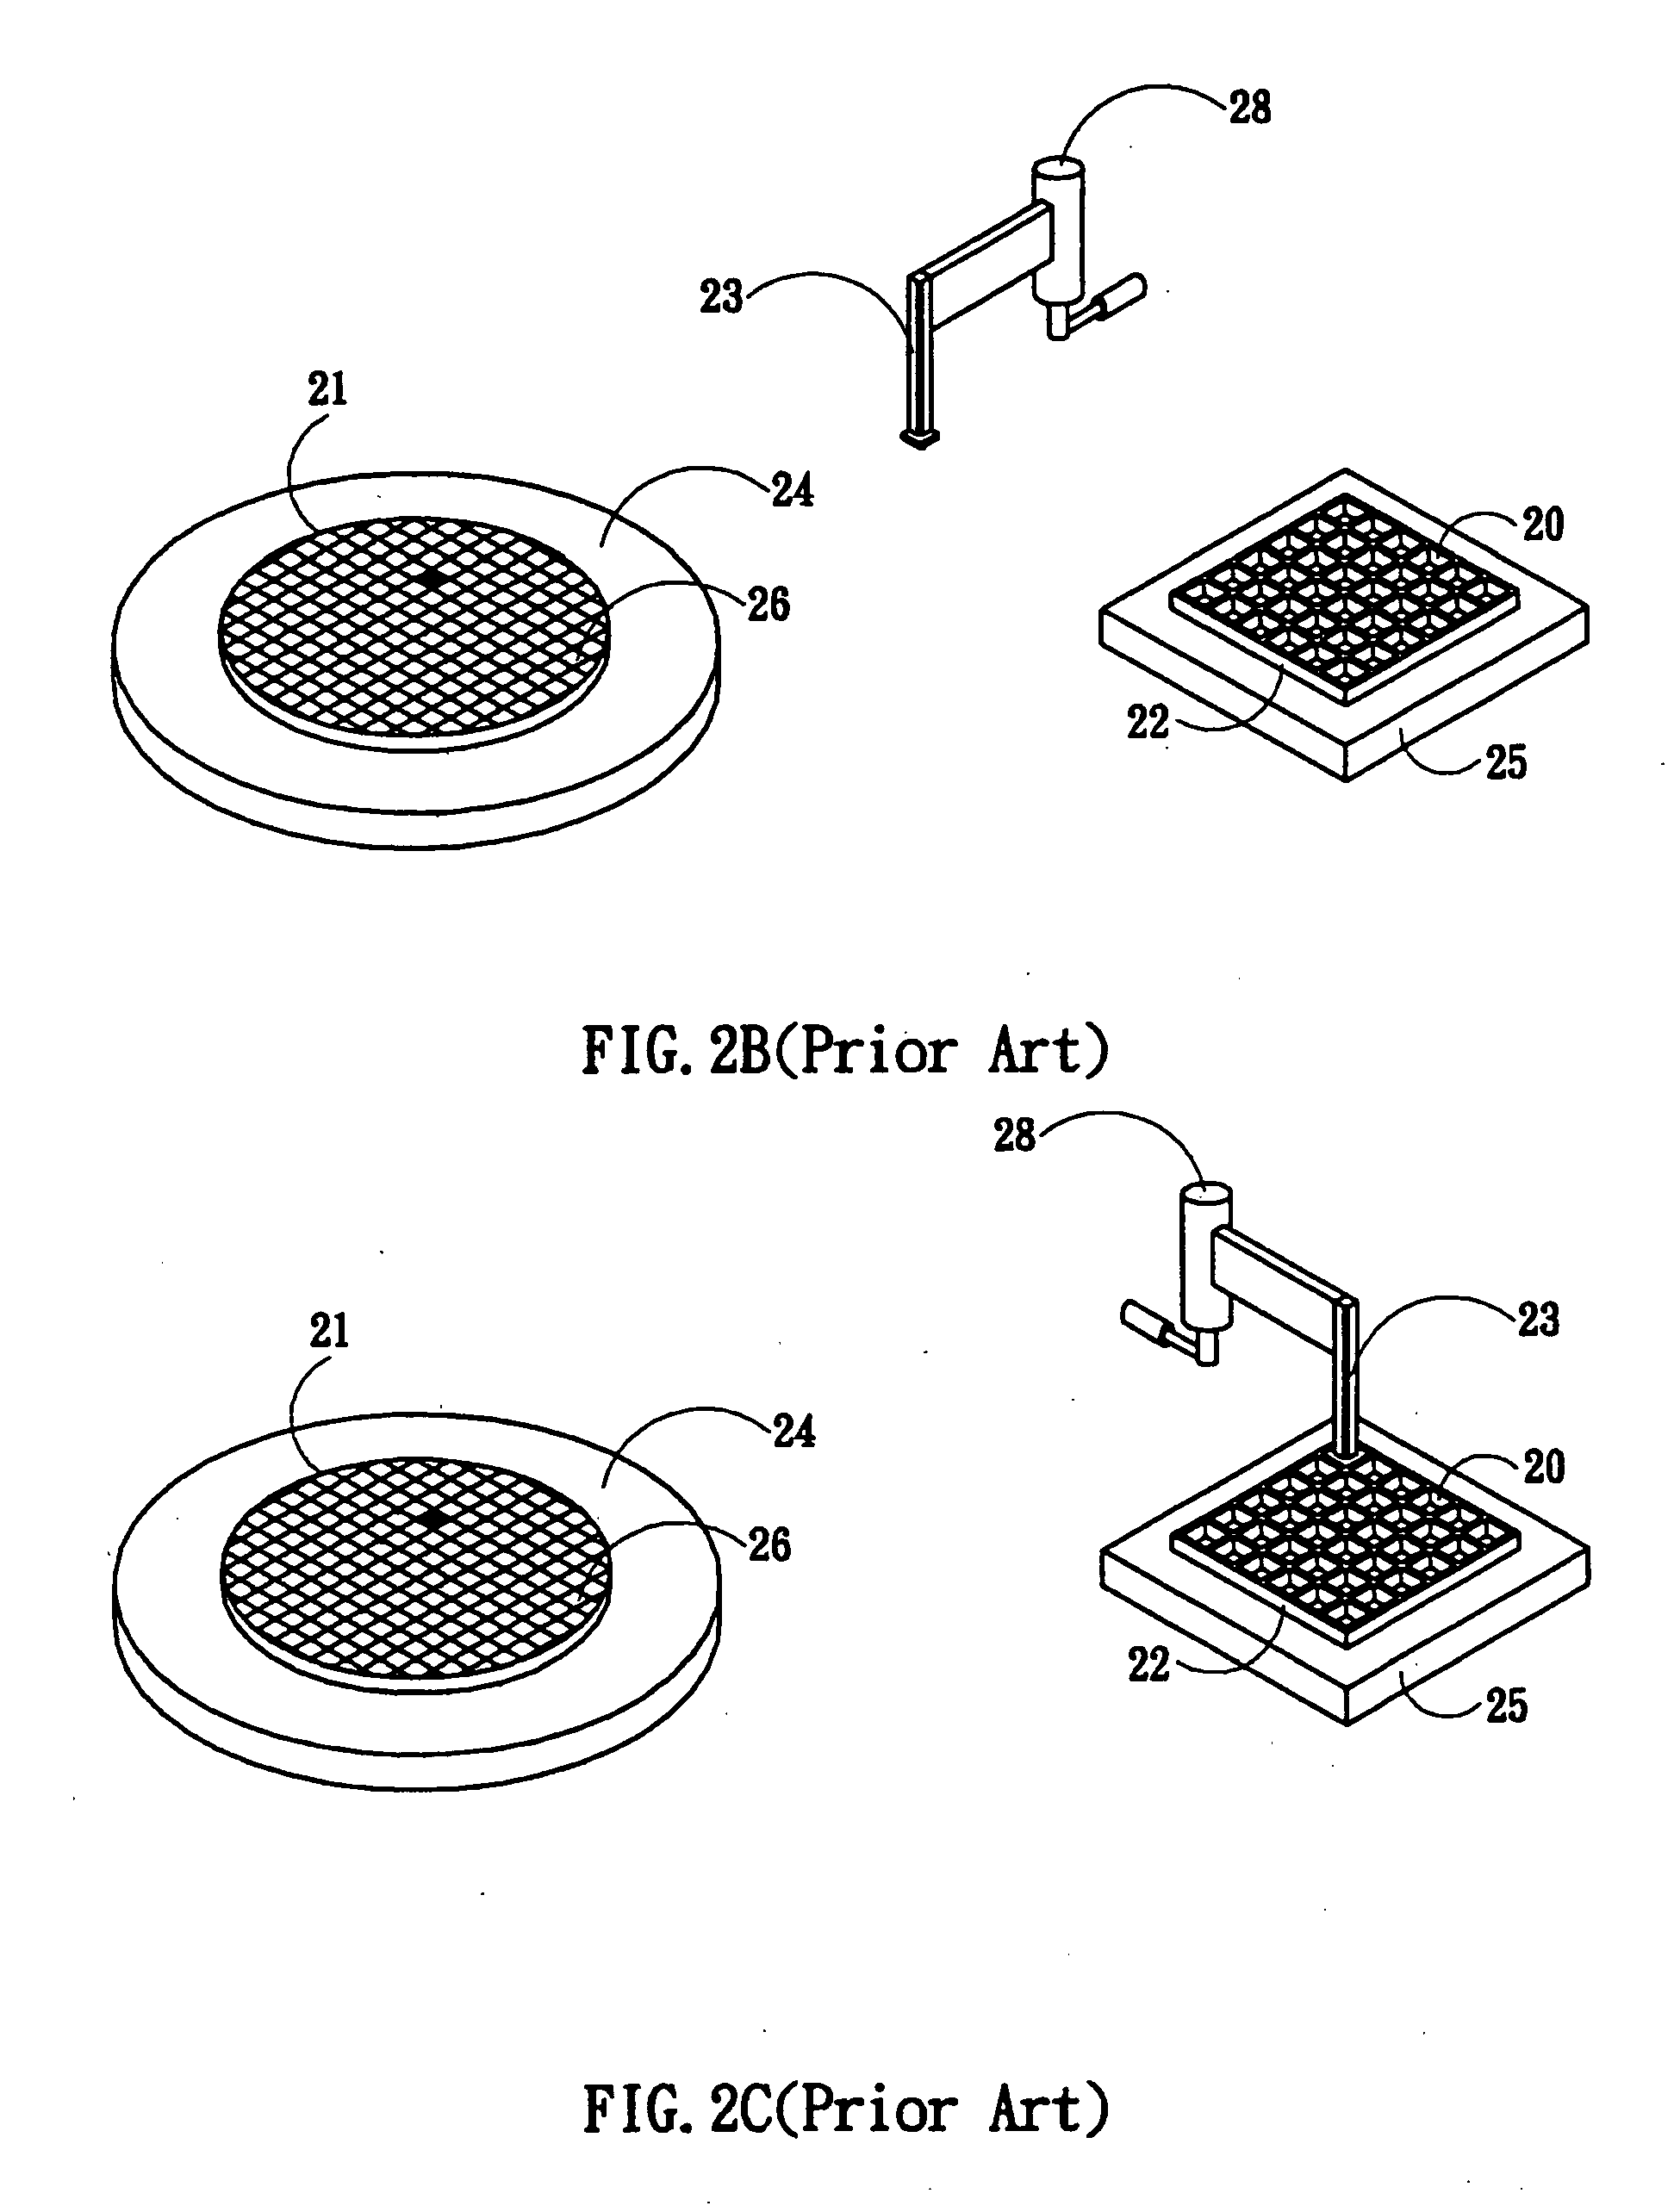 Apparatus and method of automatically cleaning a pick-up head